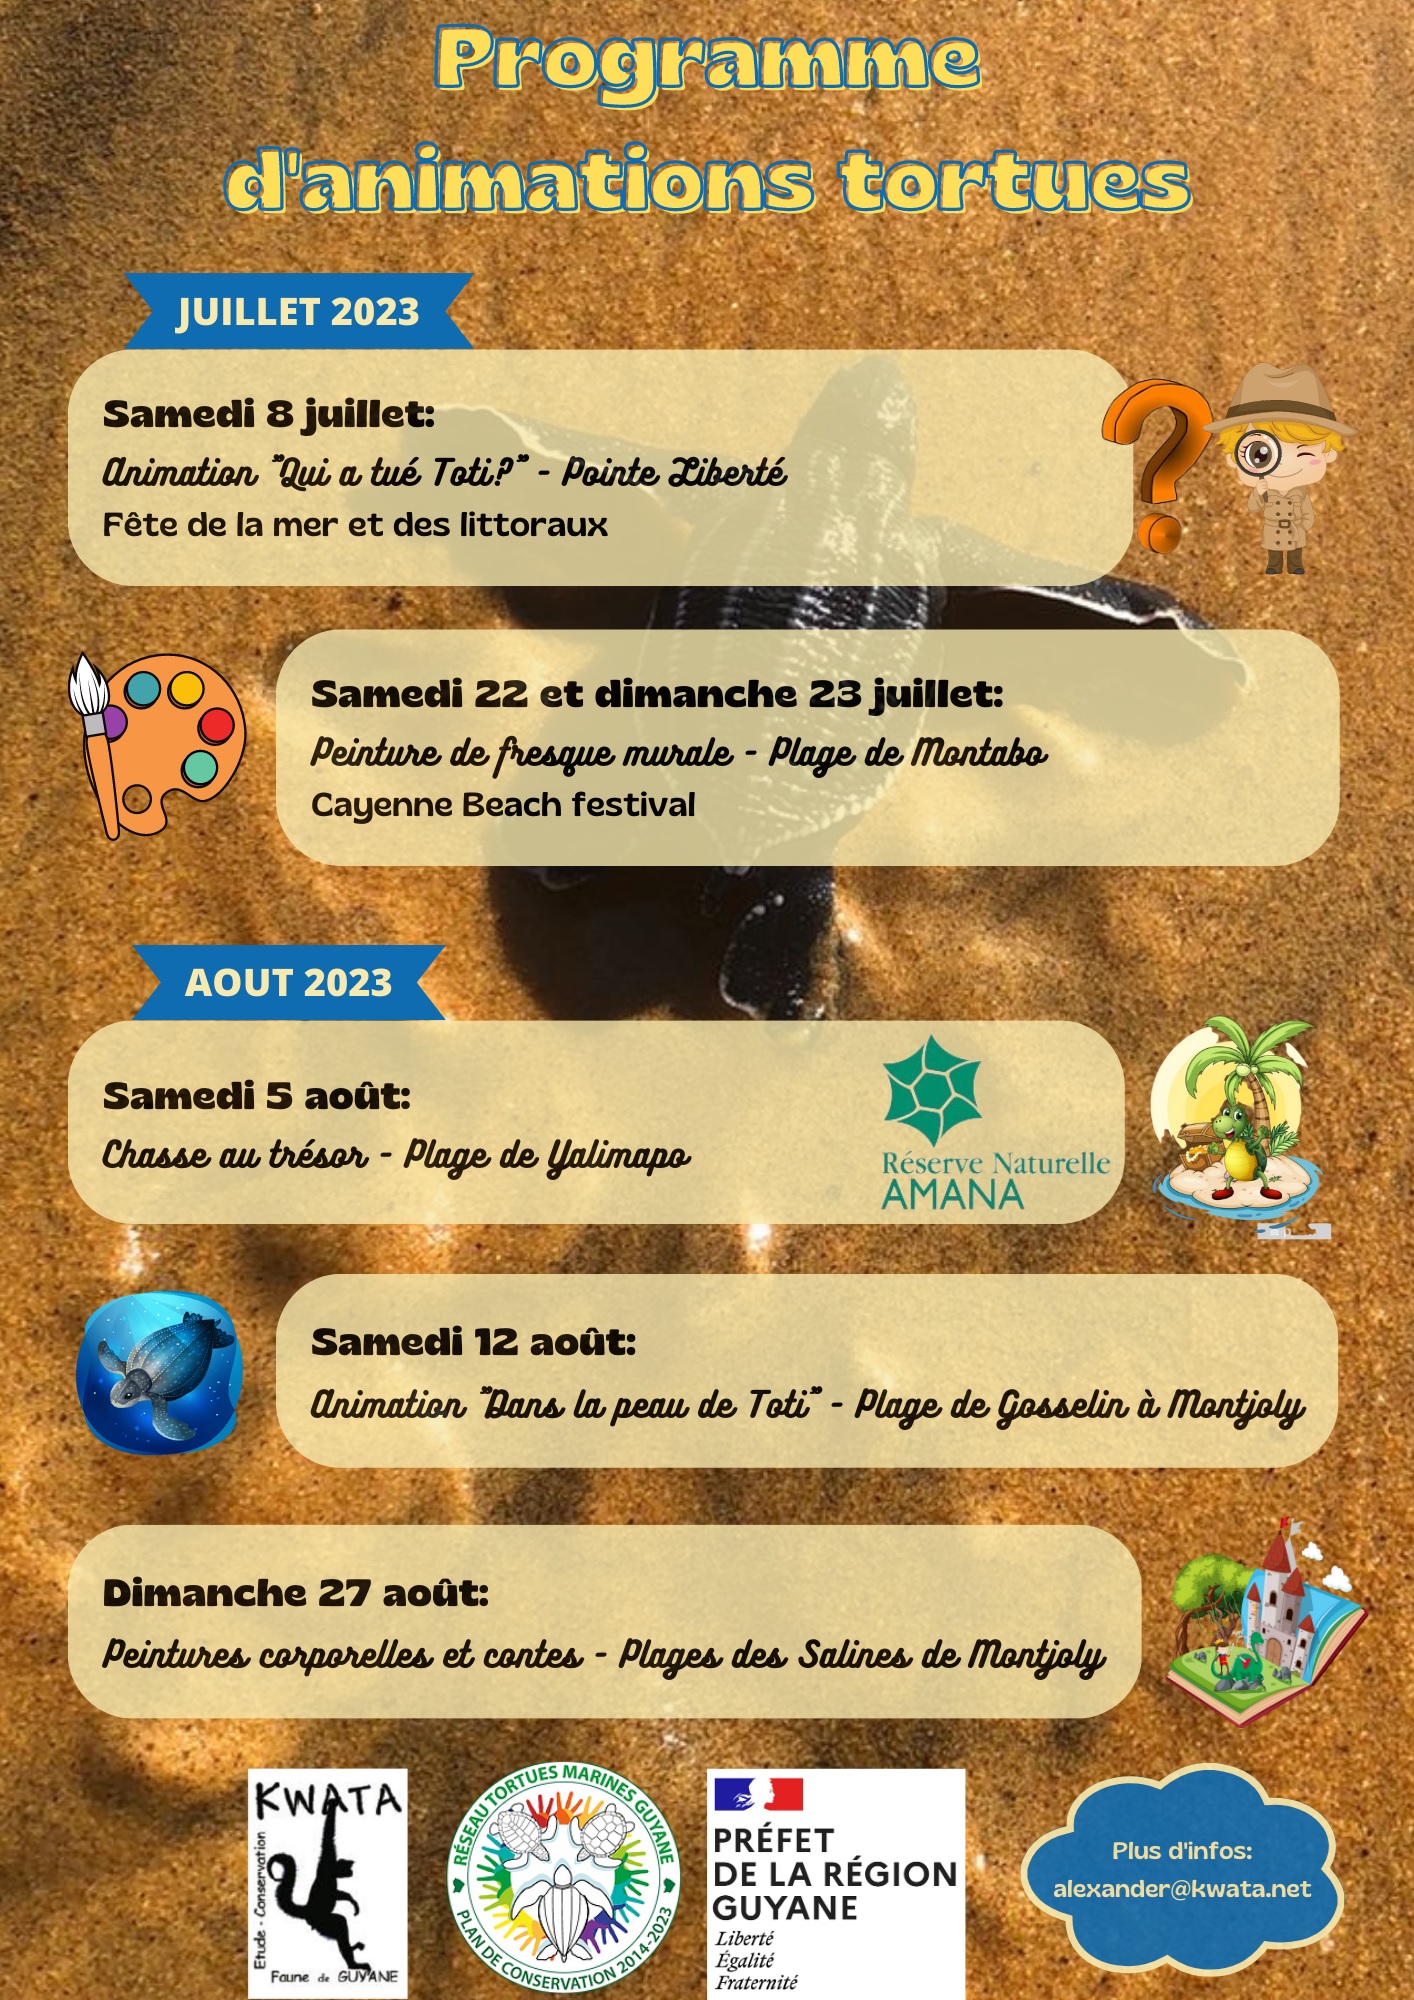 Programme d'animations tortues Kwata